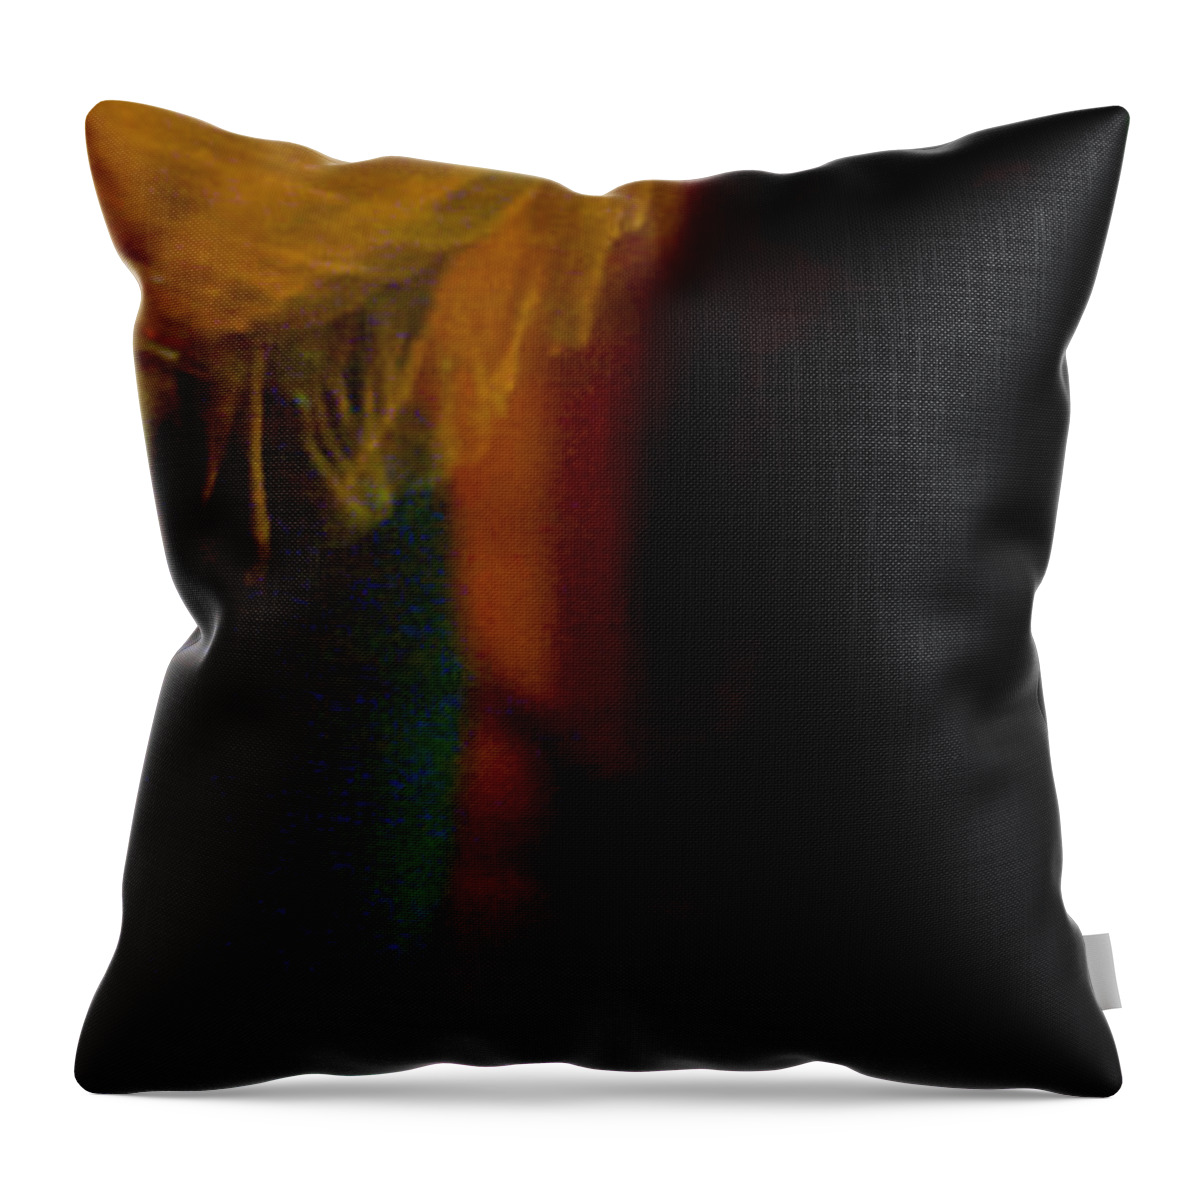 Andalusia Throw Pillow featuring the photograph Flamenco Series 23 by Catherine Sobredo